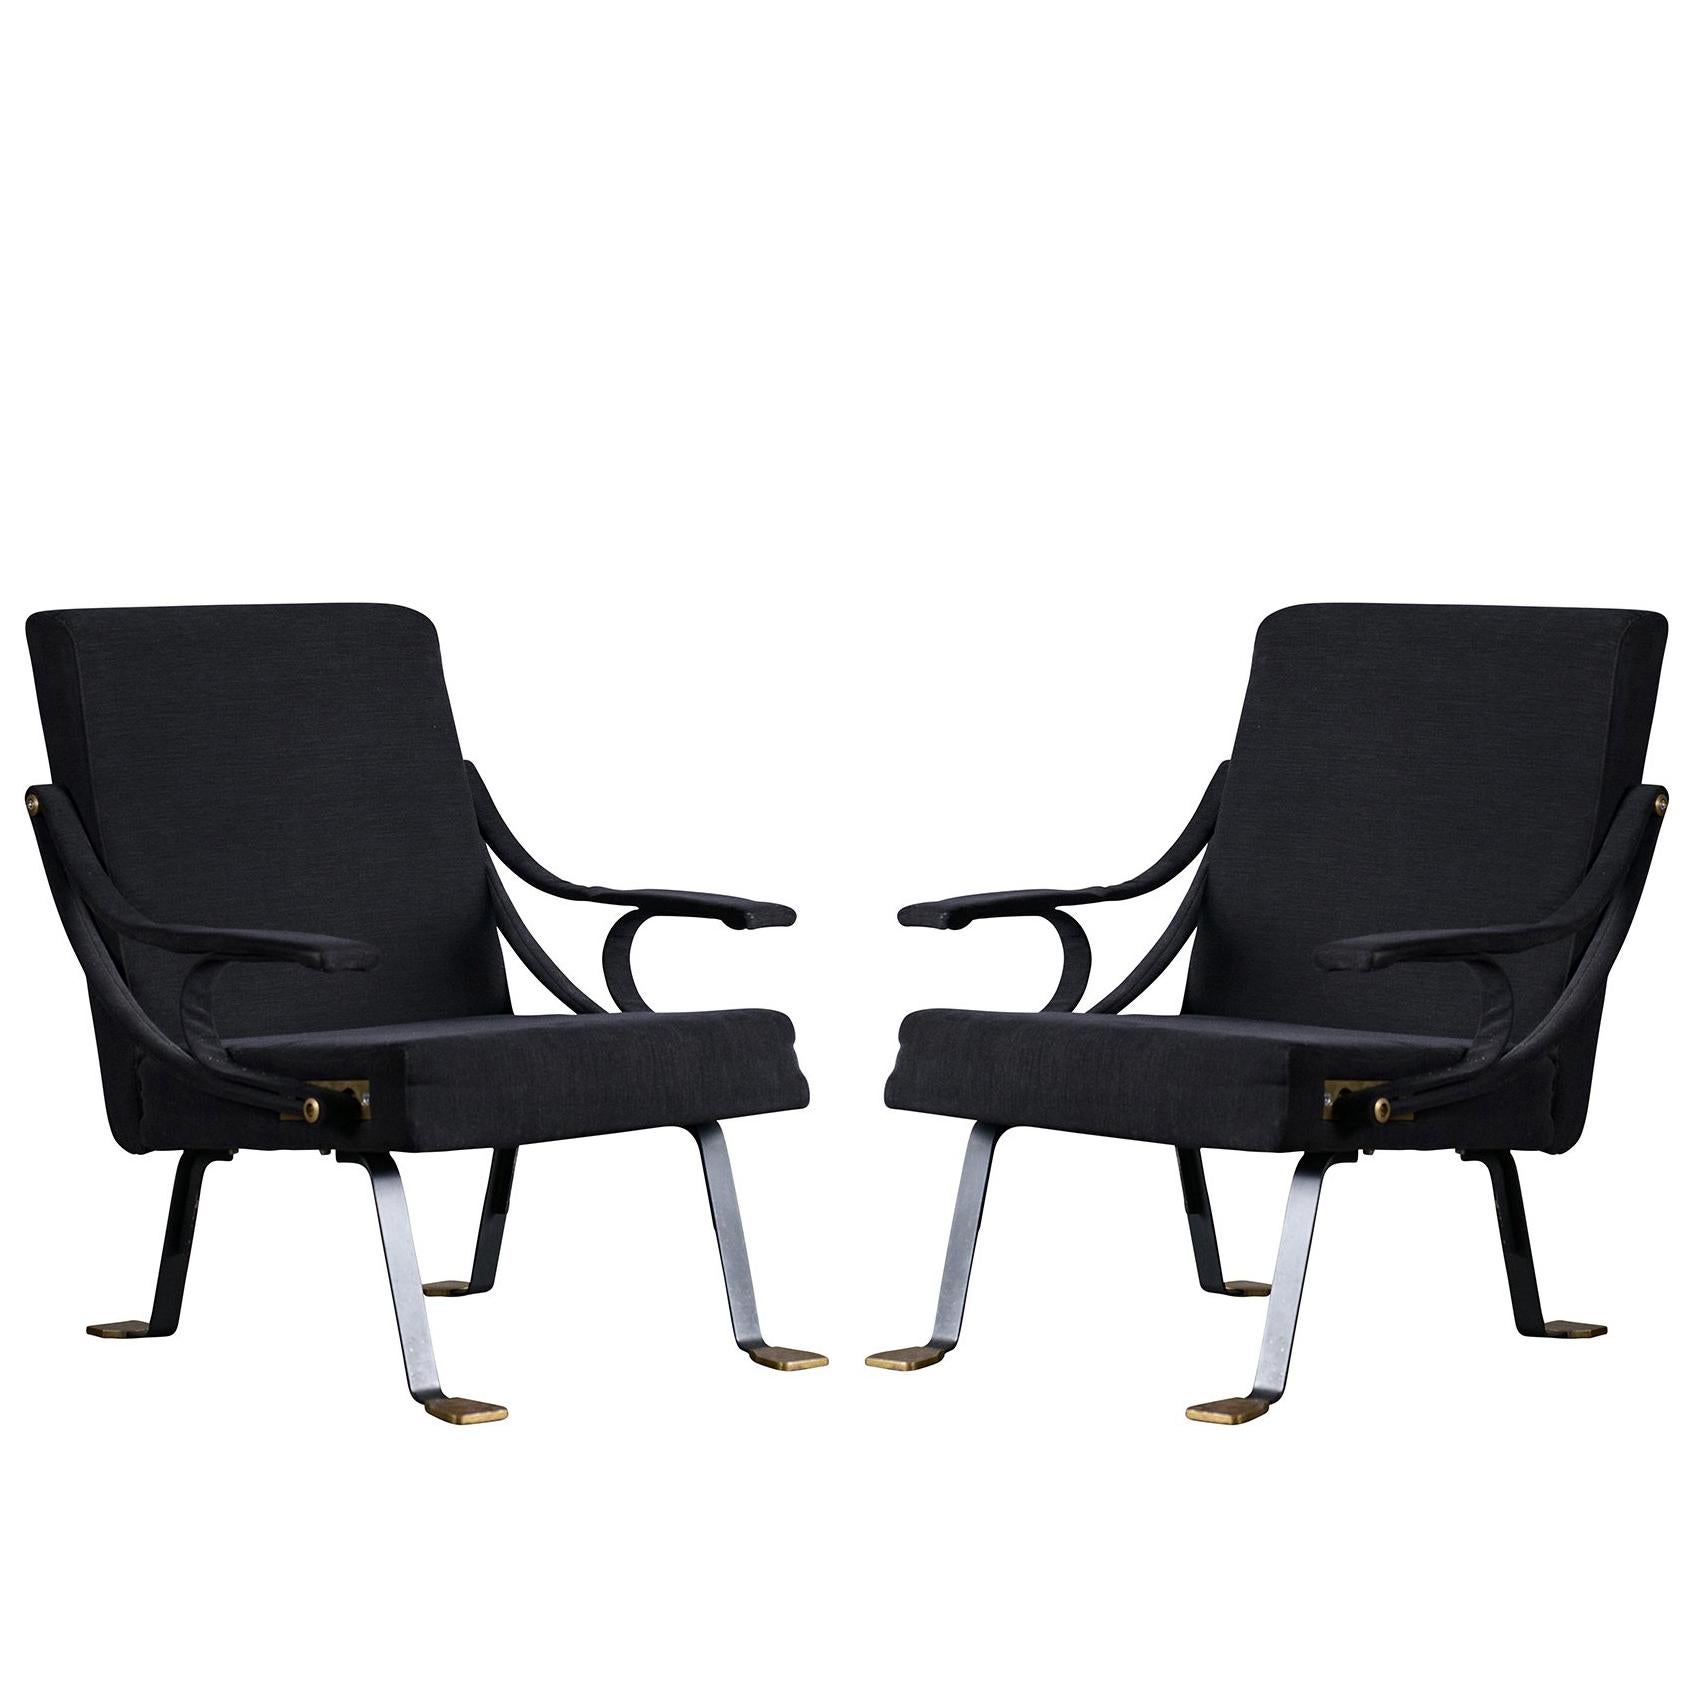 Pair of 'Digamma' Chairs by Santa & Cole